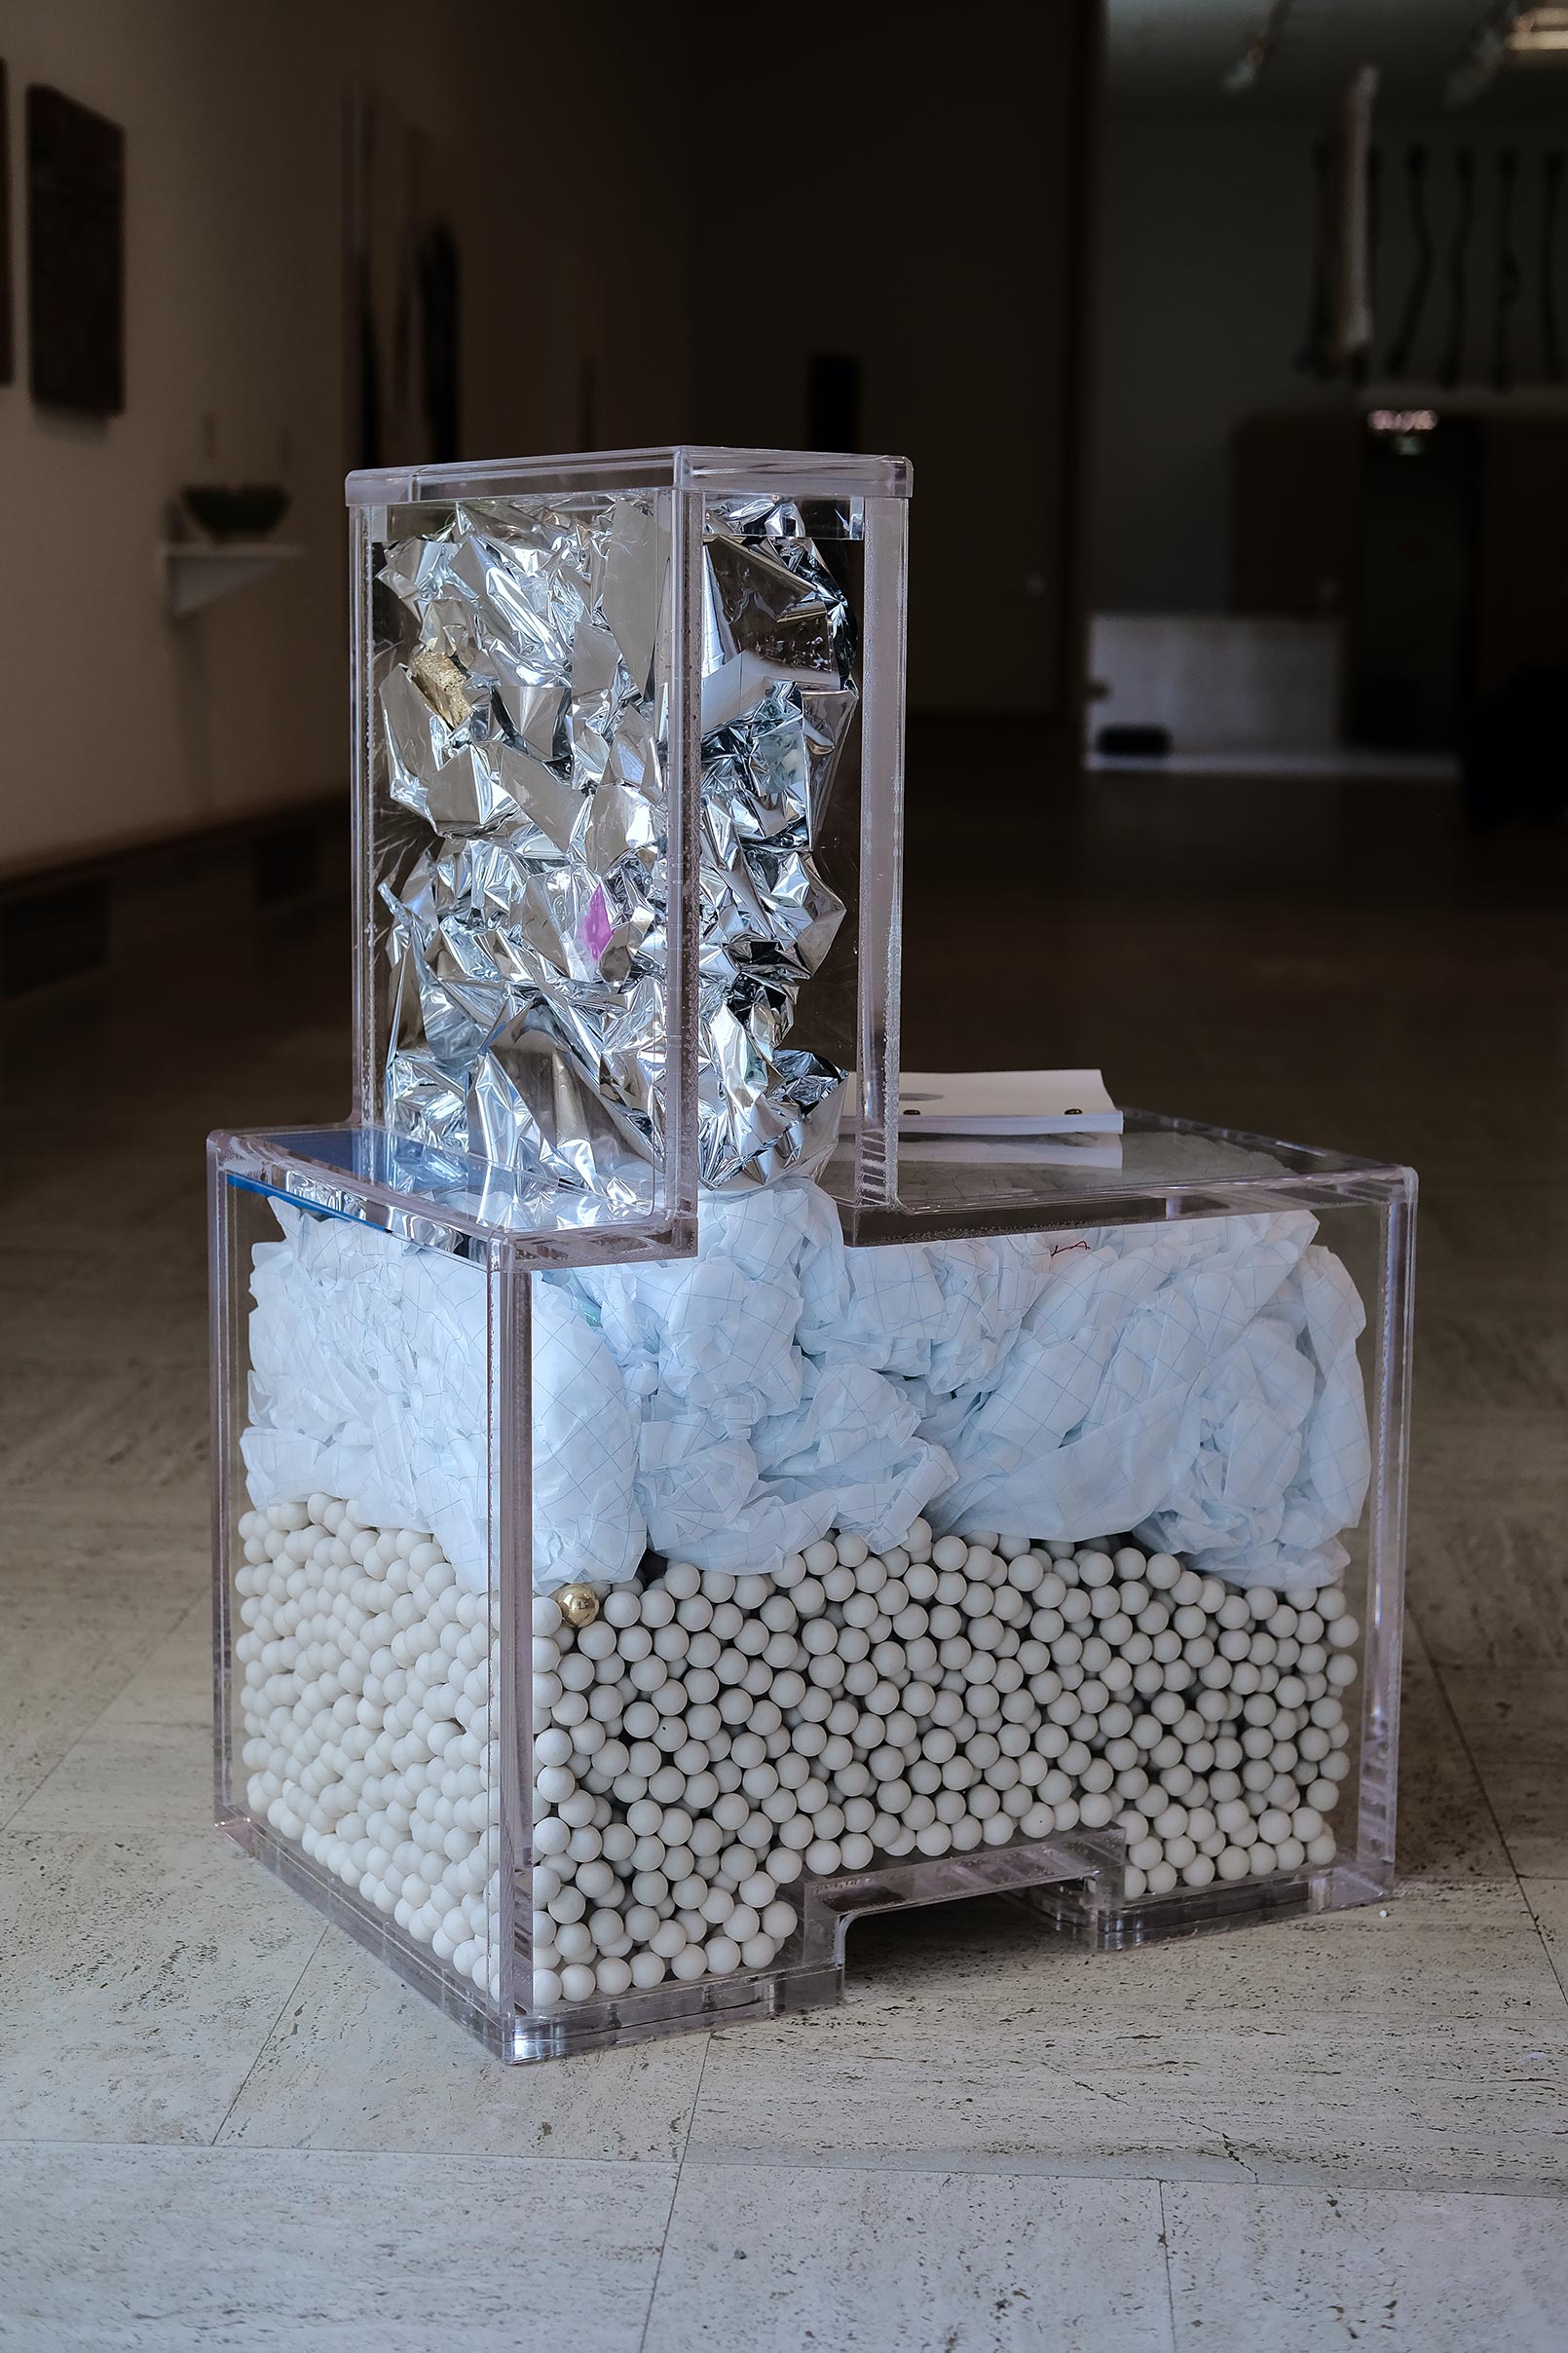 Rear view in darkened room of a ube chair made out of clear material filled with white fiber, ceramic balls, and silver foil.